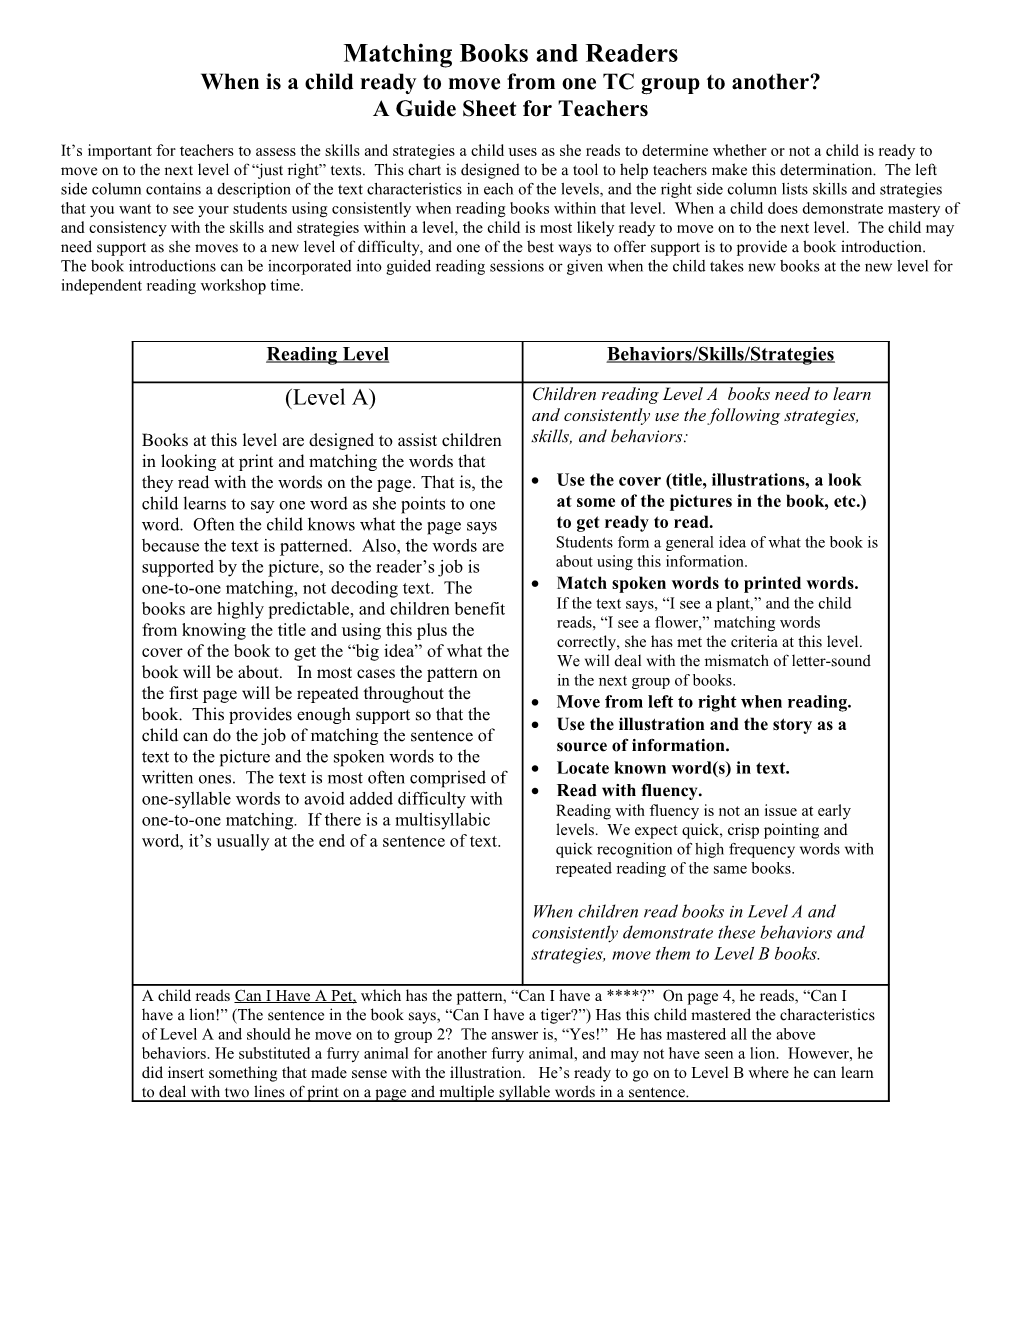 Prompts for Skills, Strategies, and Habits to Teach Students Reading Books A-L